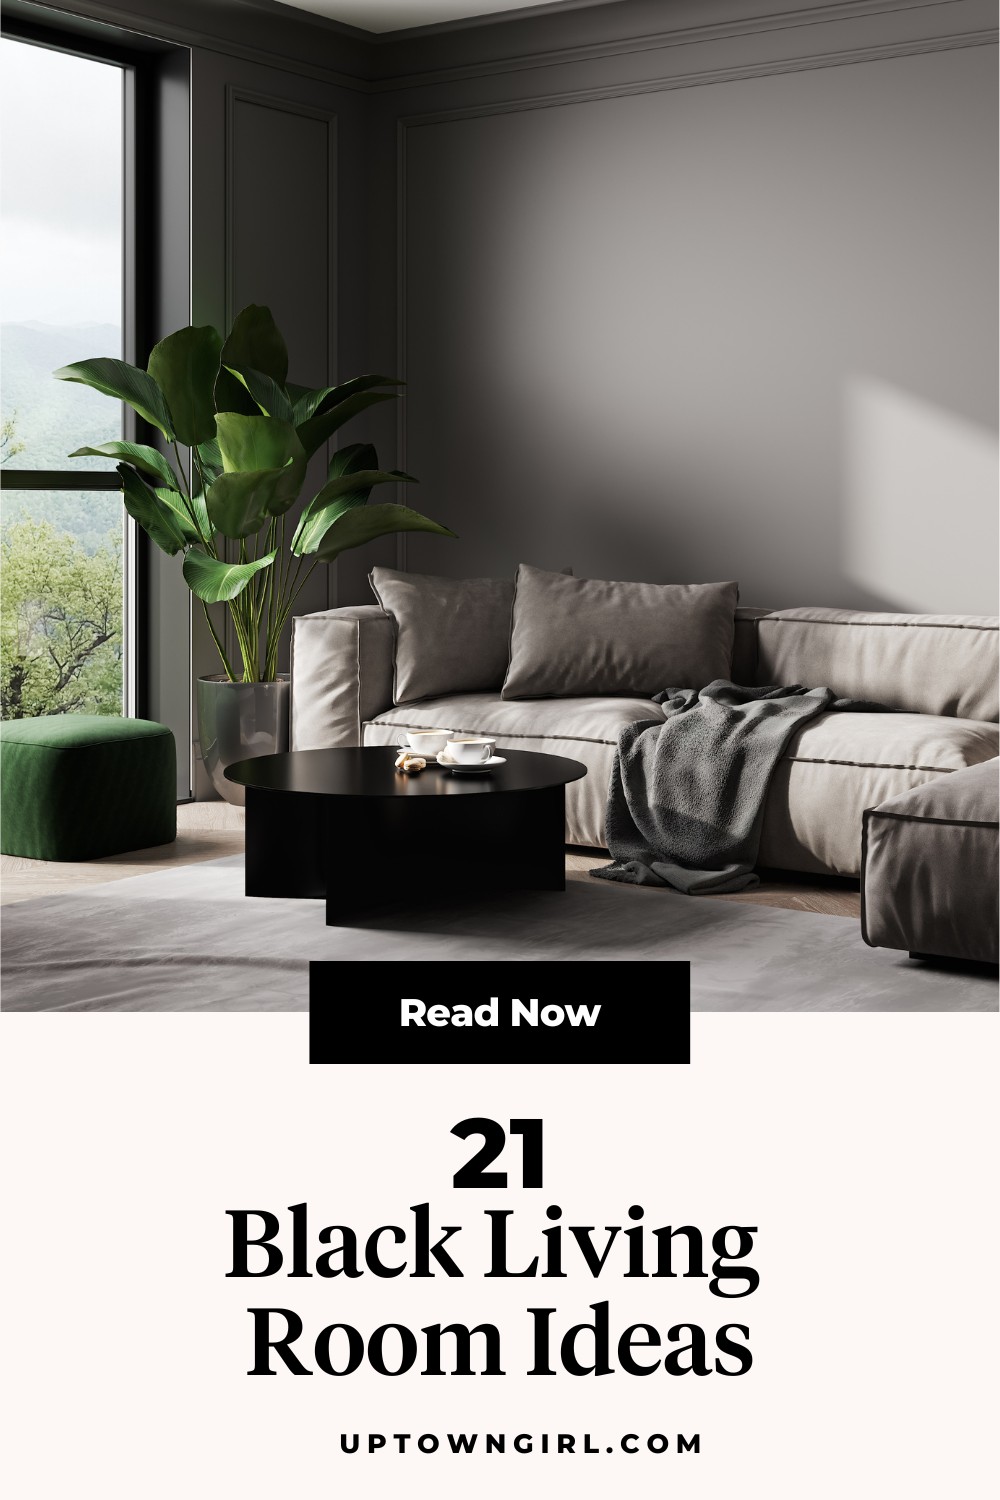 21 Genius Black Living Room Ideas to Make a Bold Statement - Uptown Girl